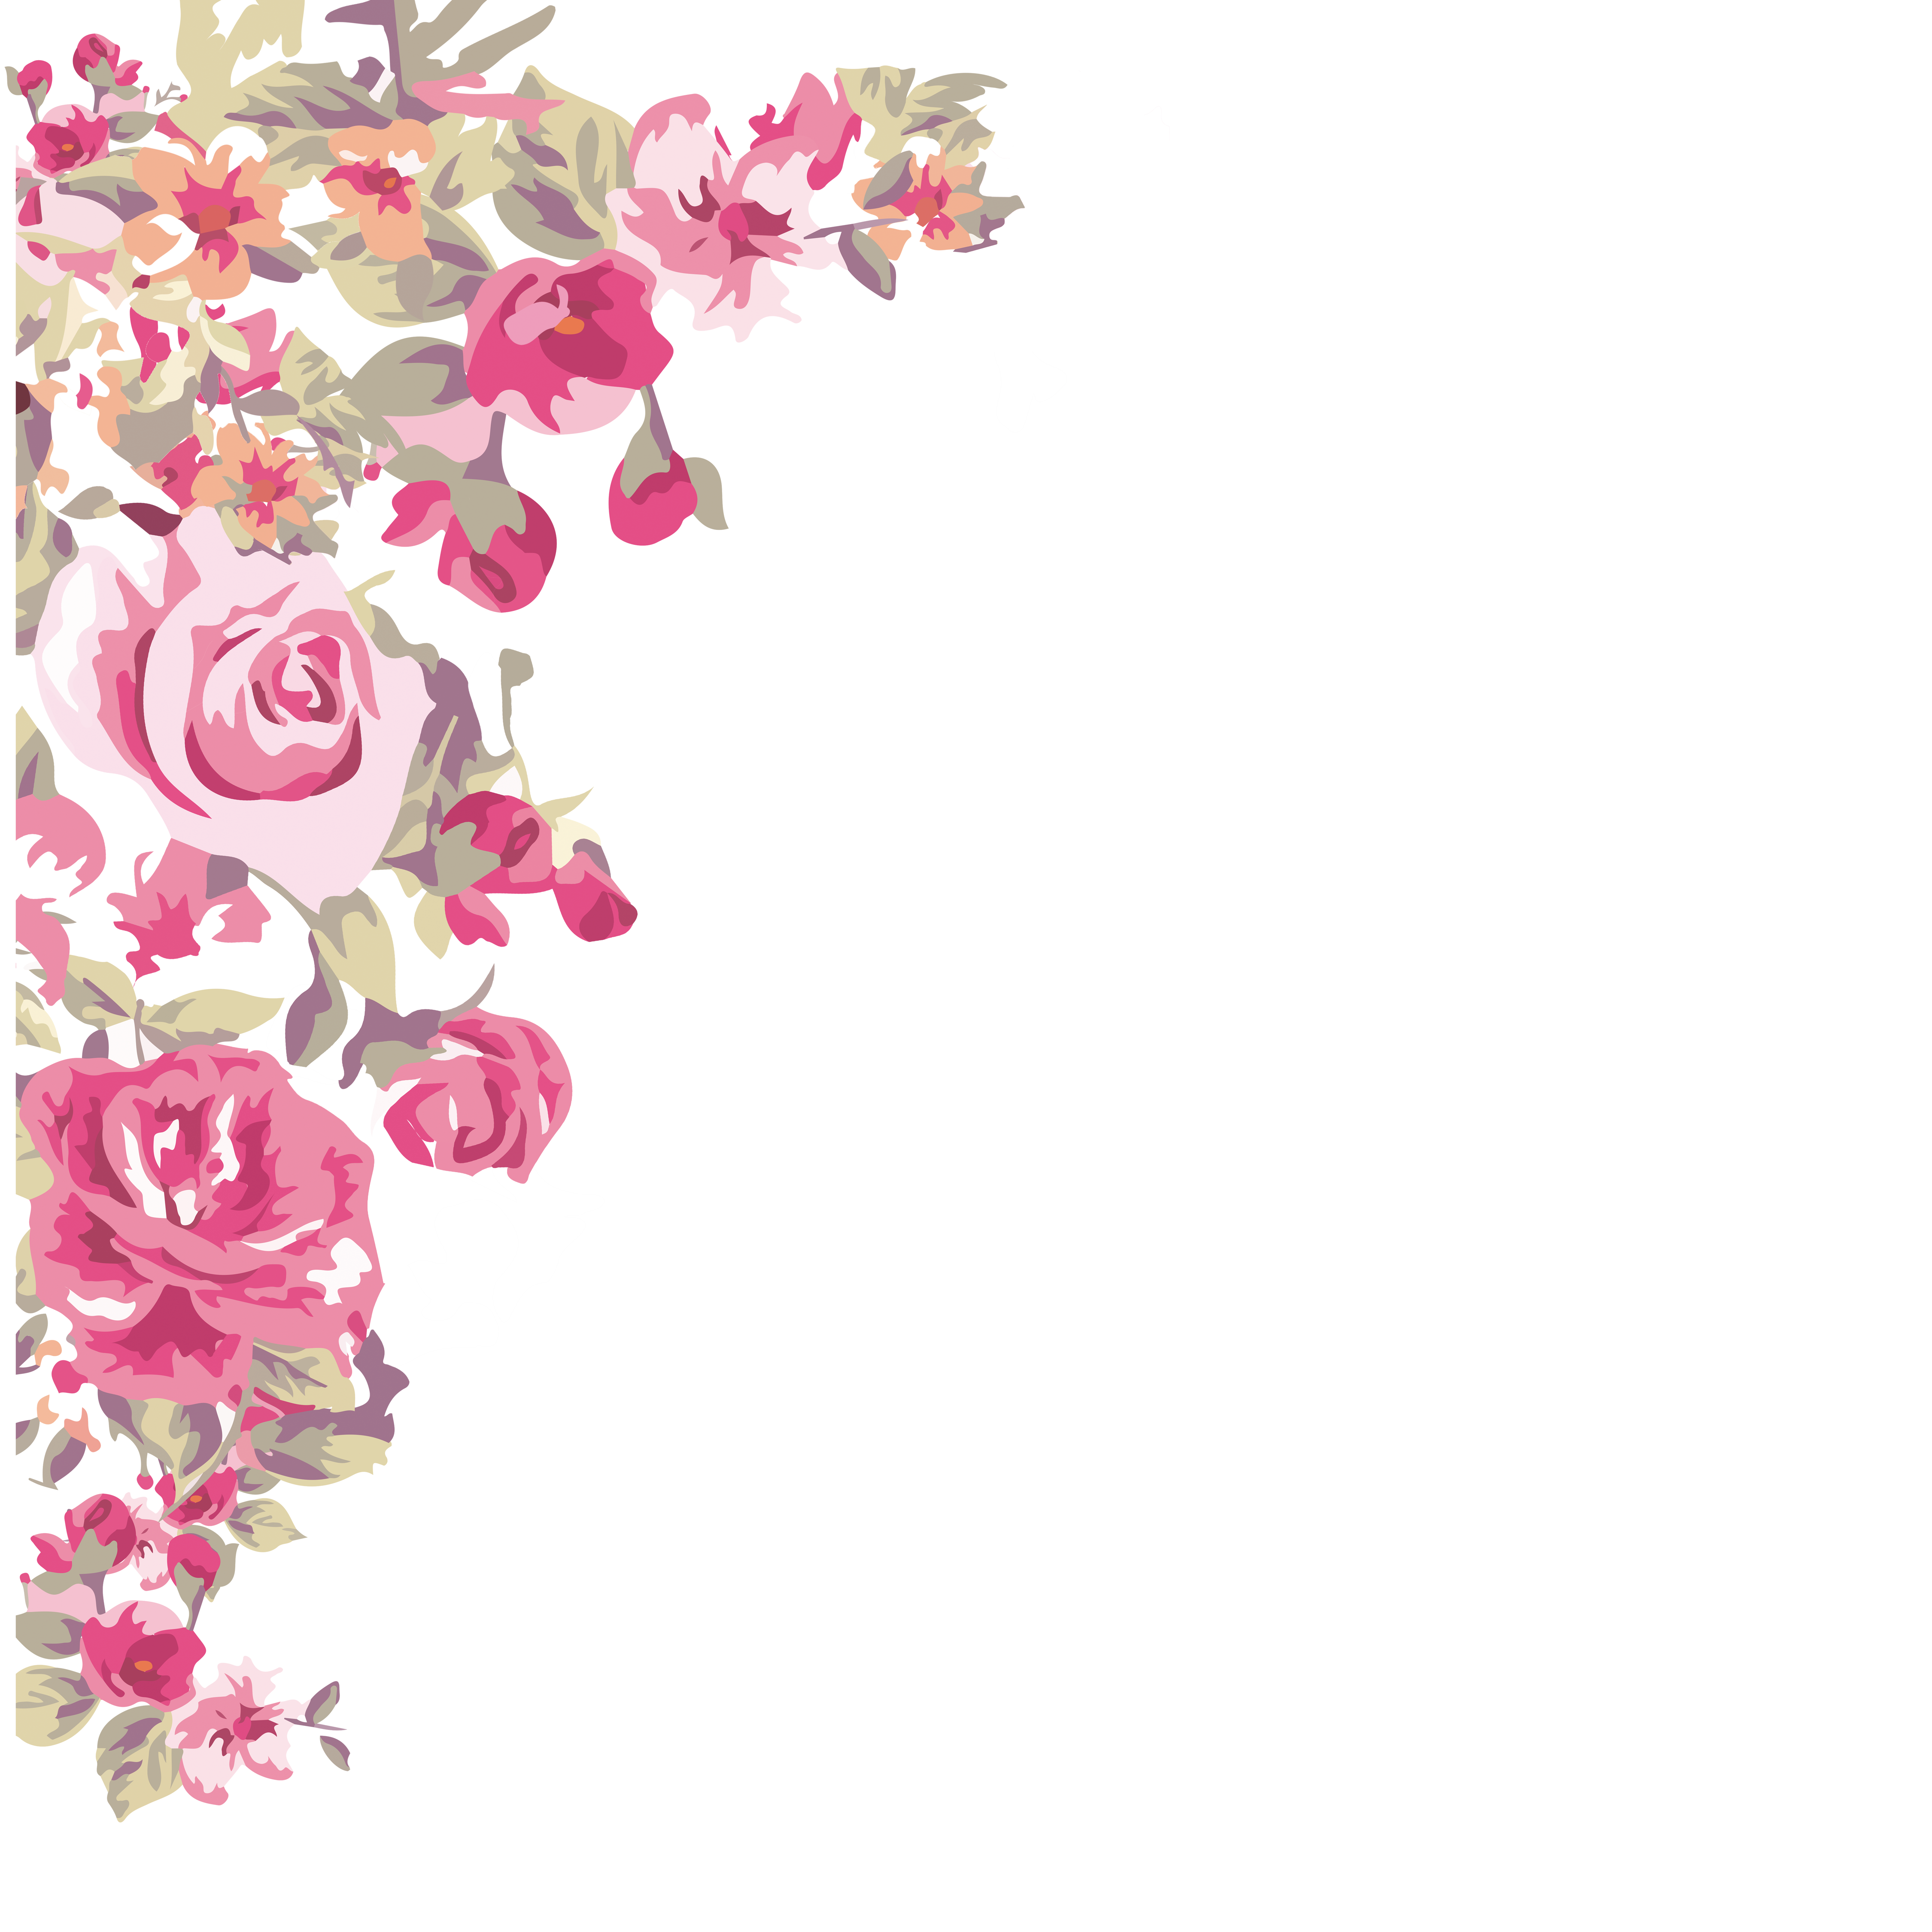 Download Png Flowers Free | PNG & GIF BASE